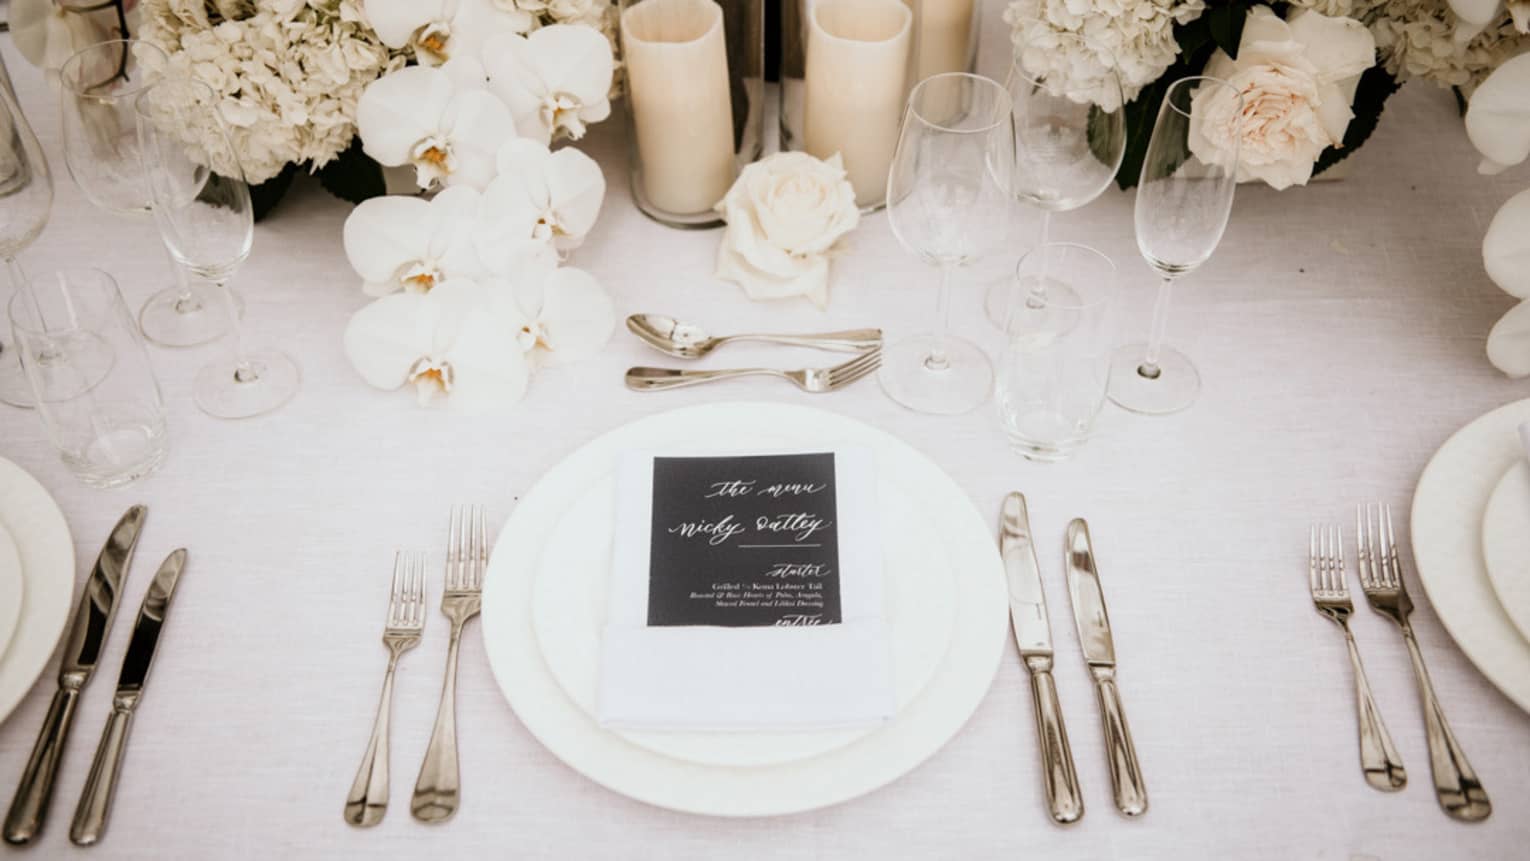 Wedding table setting with white flowers and candles, menu on white napkin and plates